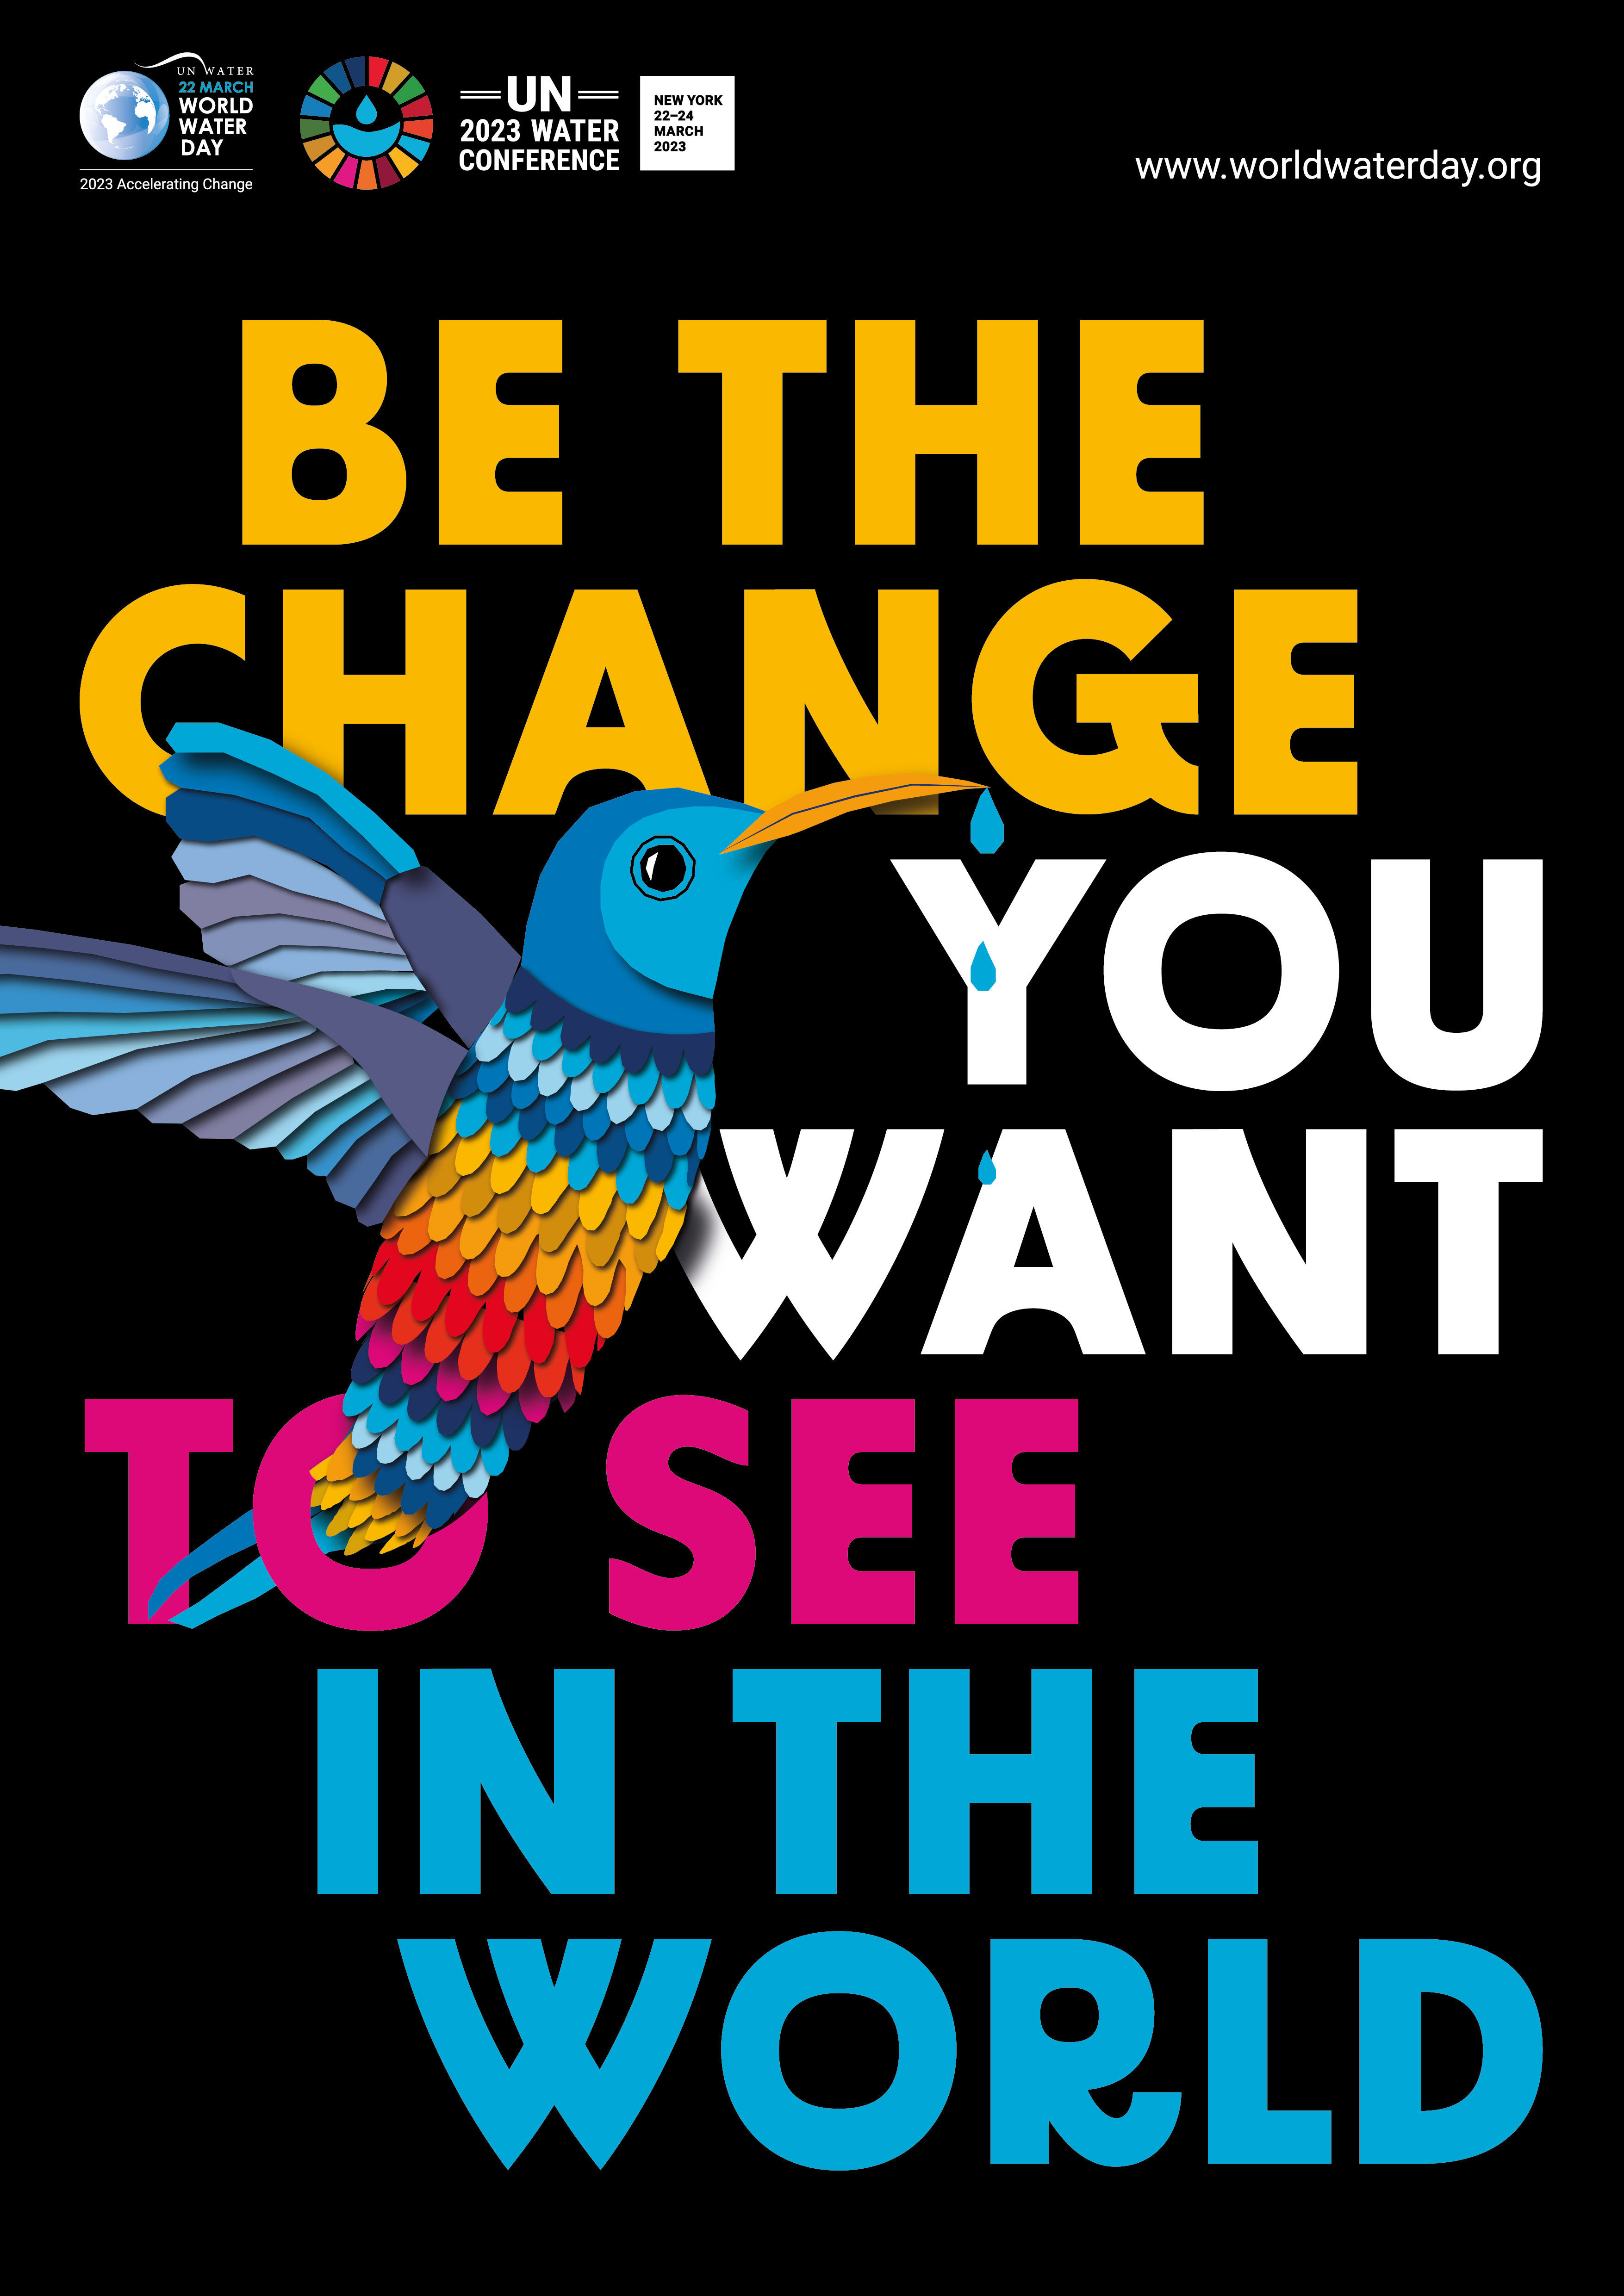 Plansch med kolibri och texten "Be the change you want to see in the world" från officiella World Water Day